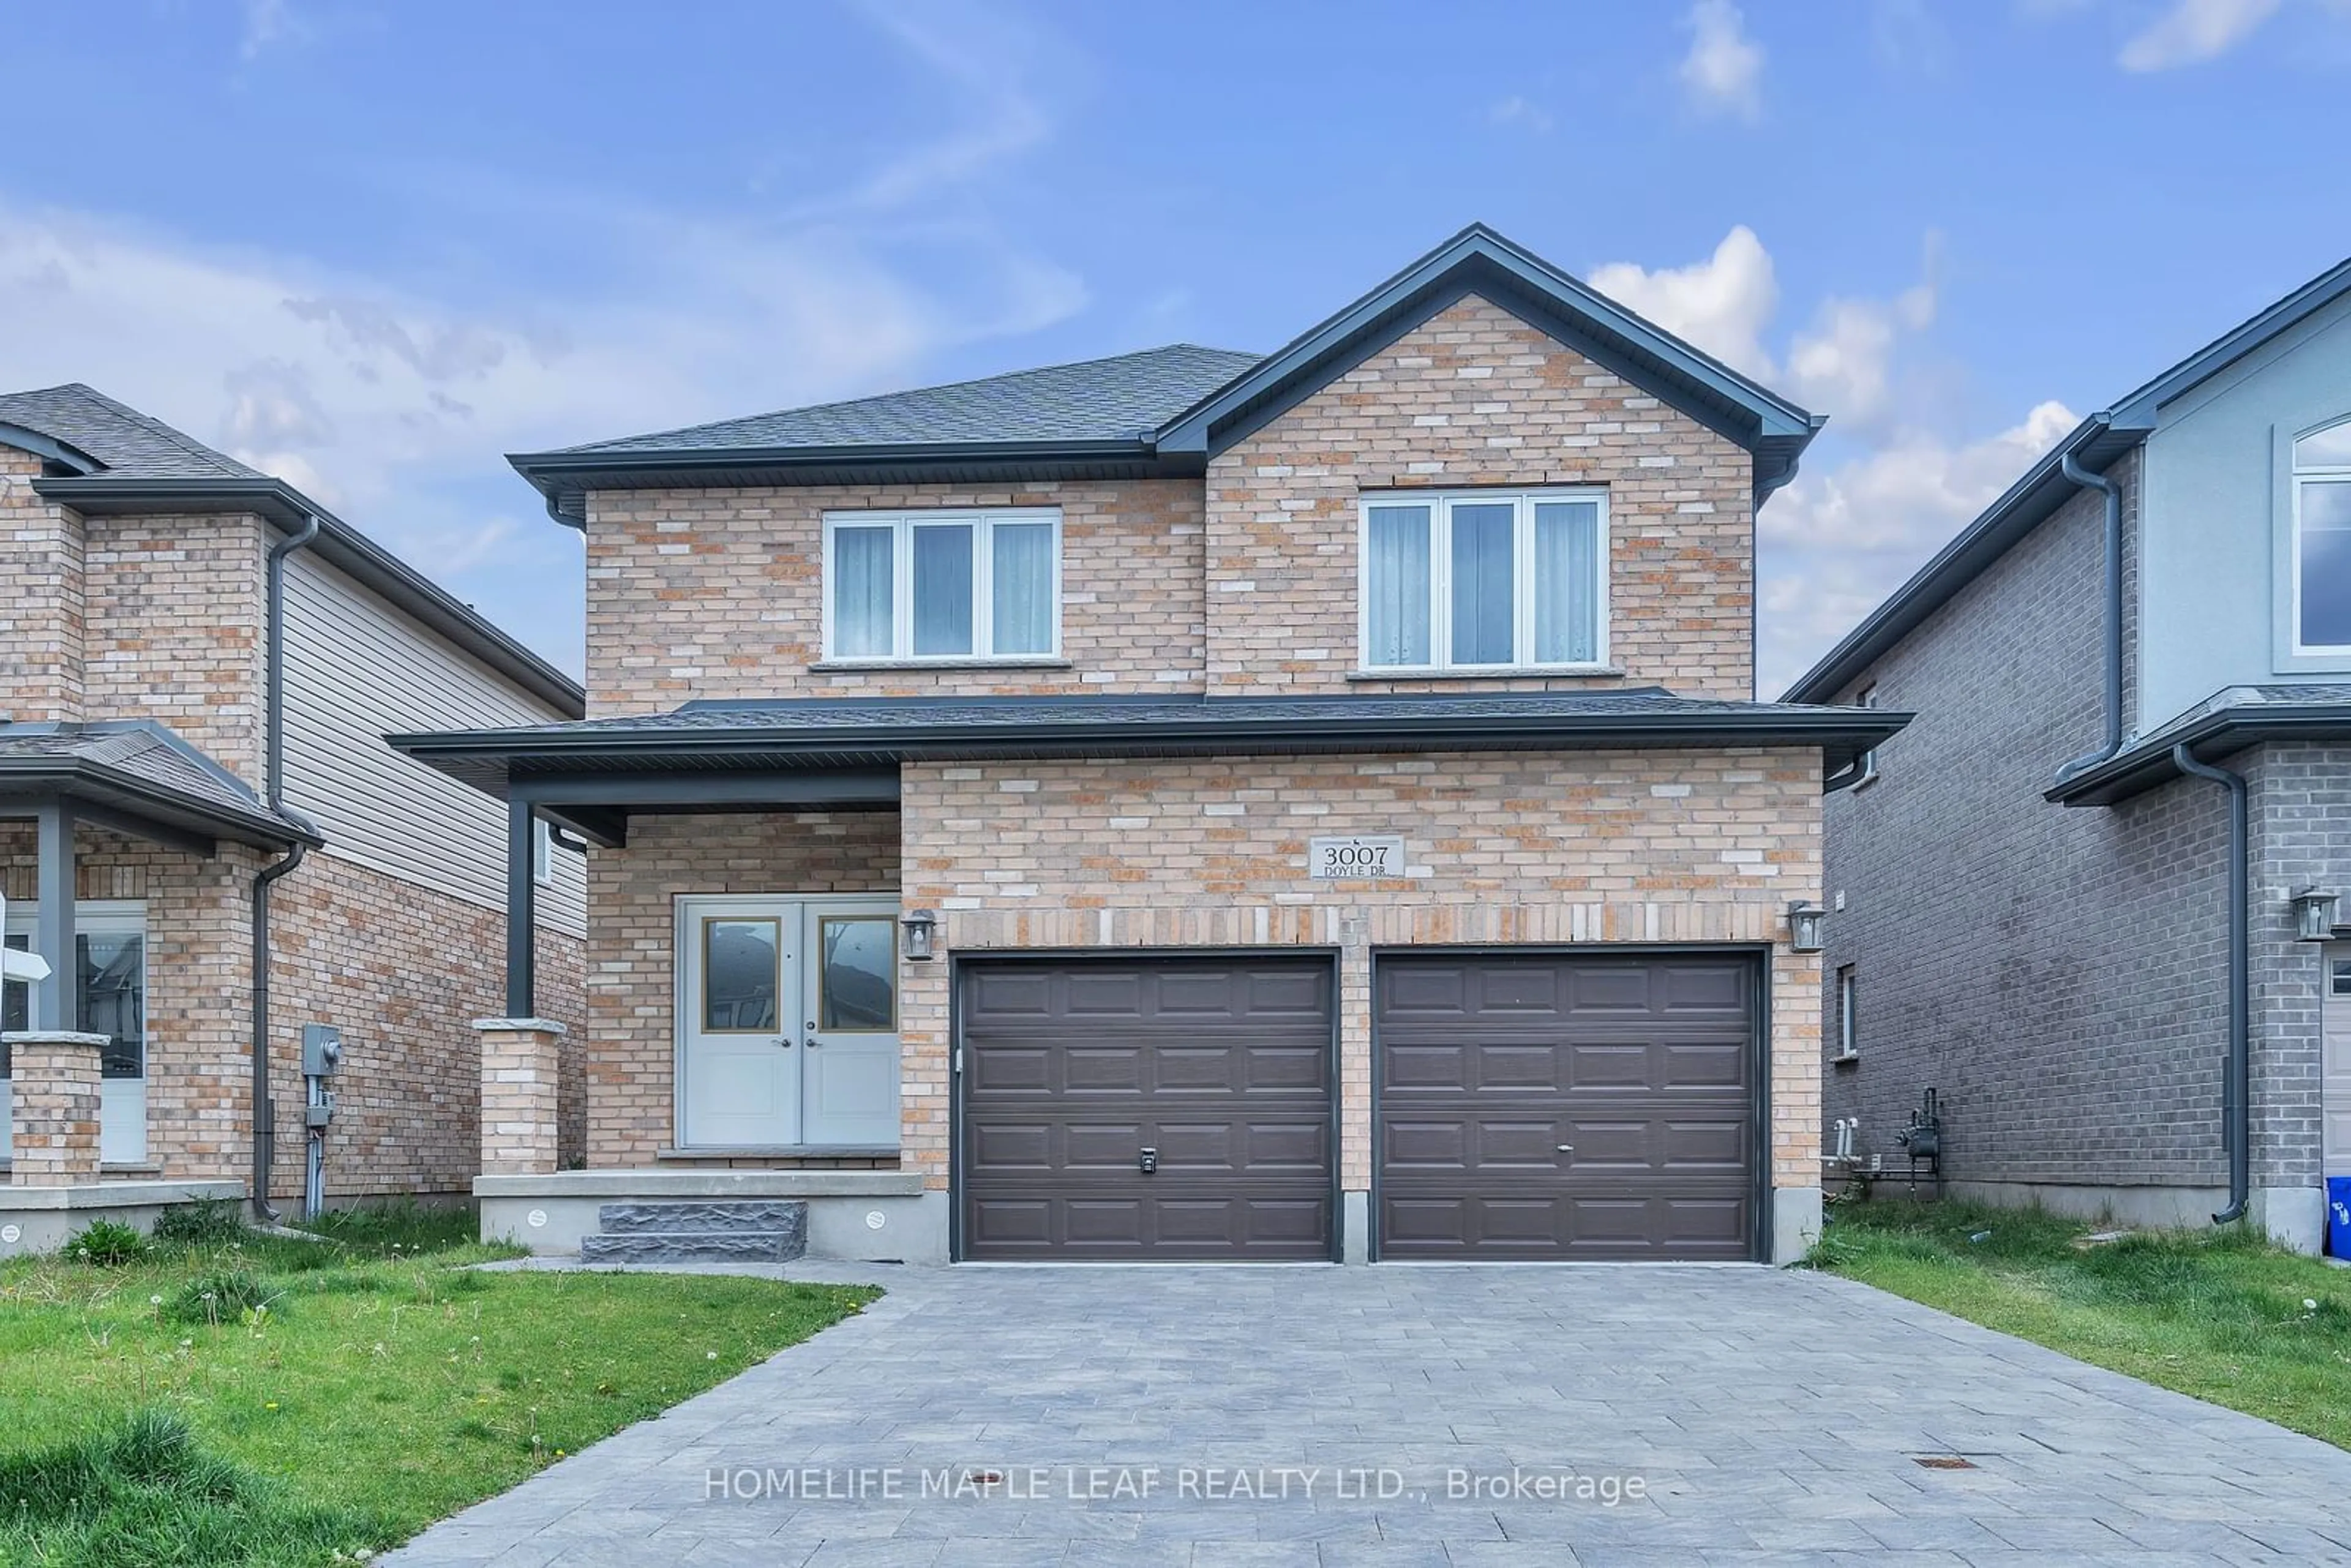 Home with brick exterior material for 3007 DOYLE Dr, London Ontario N6M 0G8